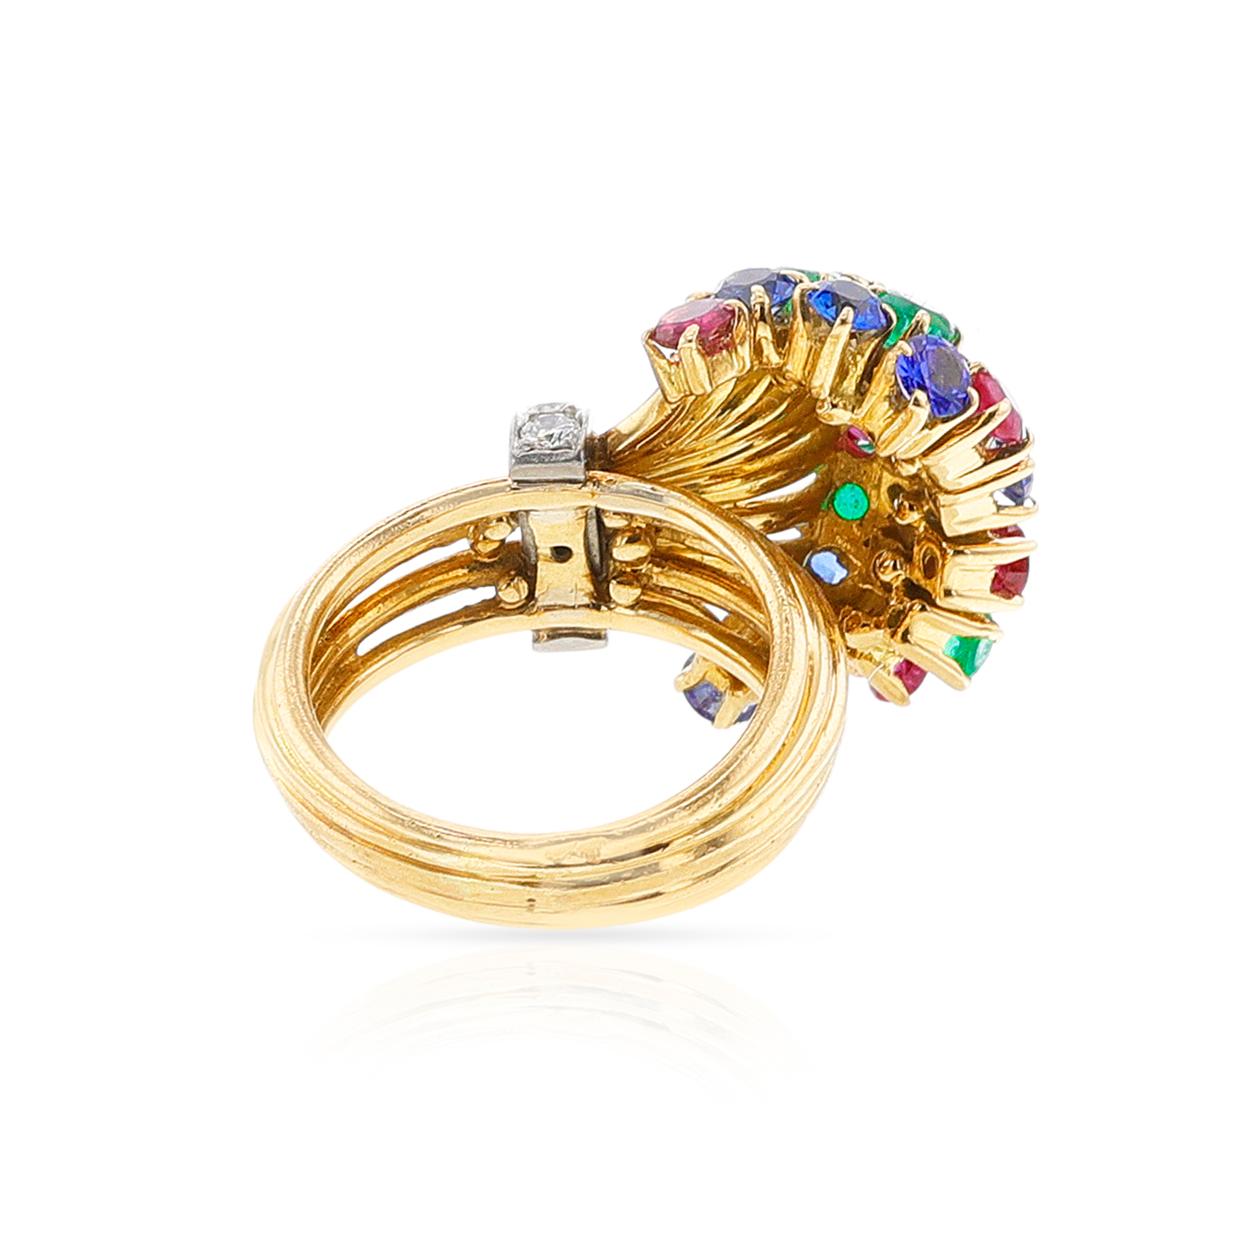 Ruby, Emerald, Sapphire, Diamond Cocktail Ring, 18k For Sale 2